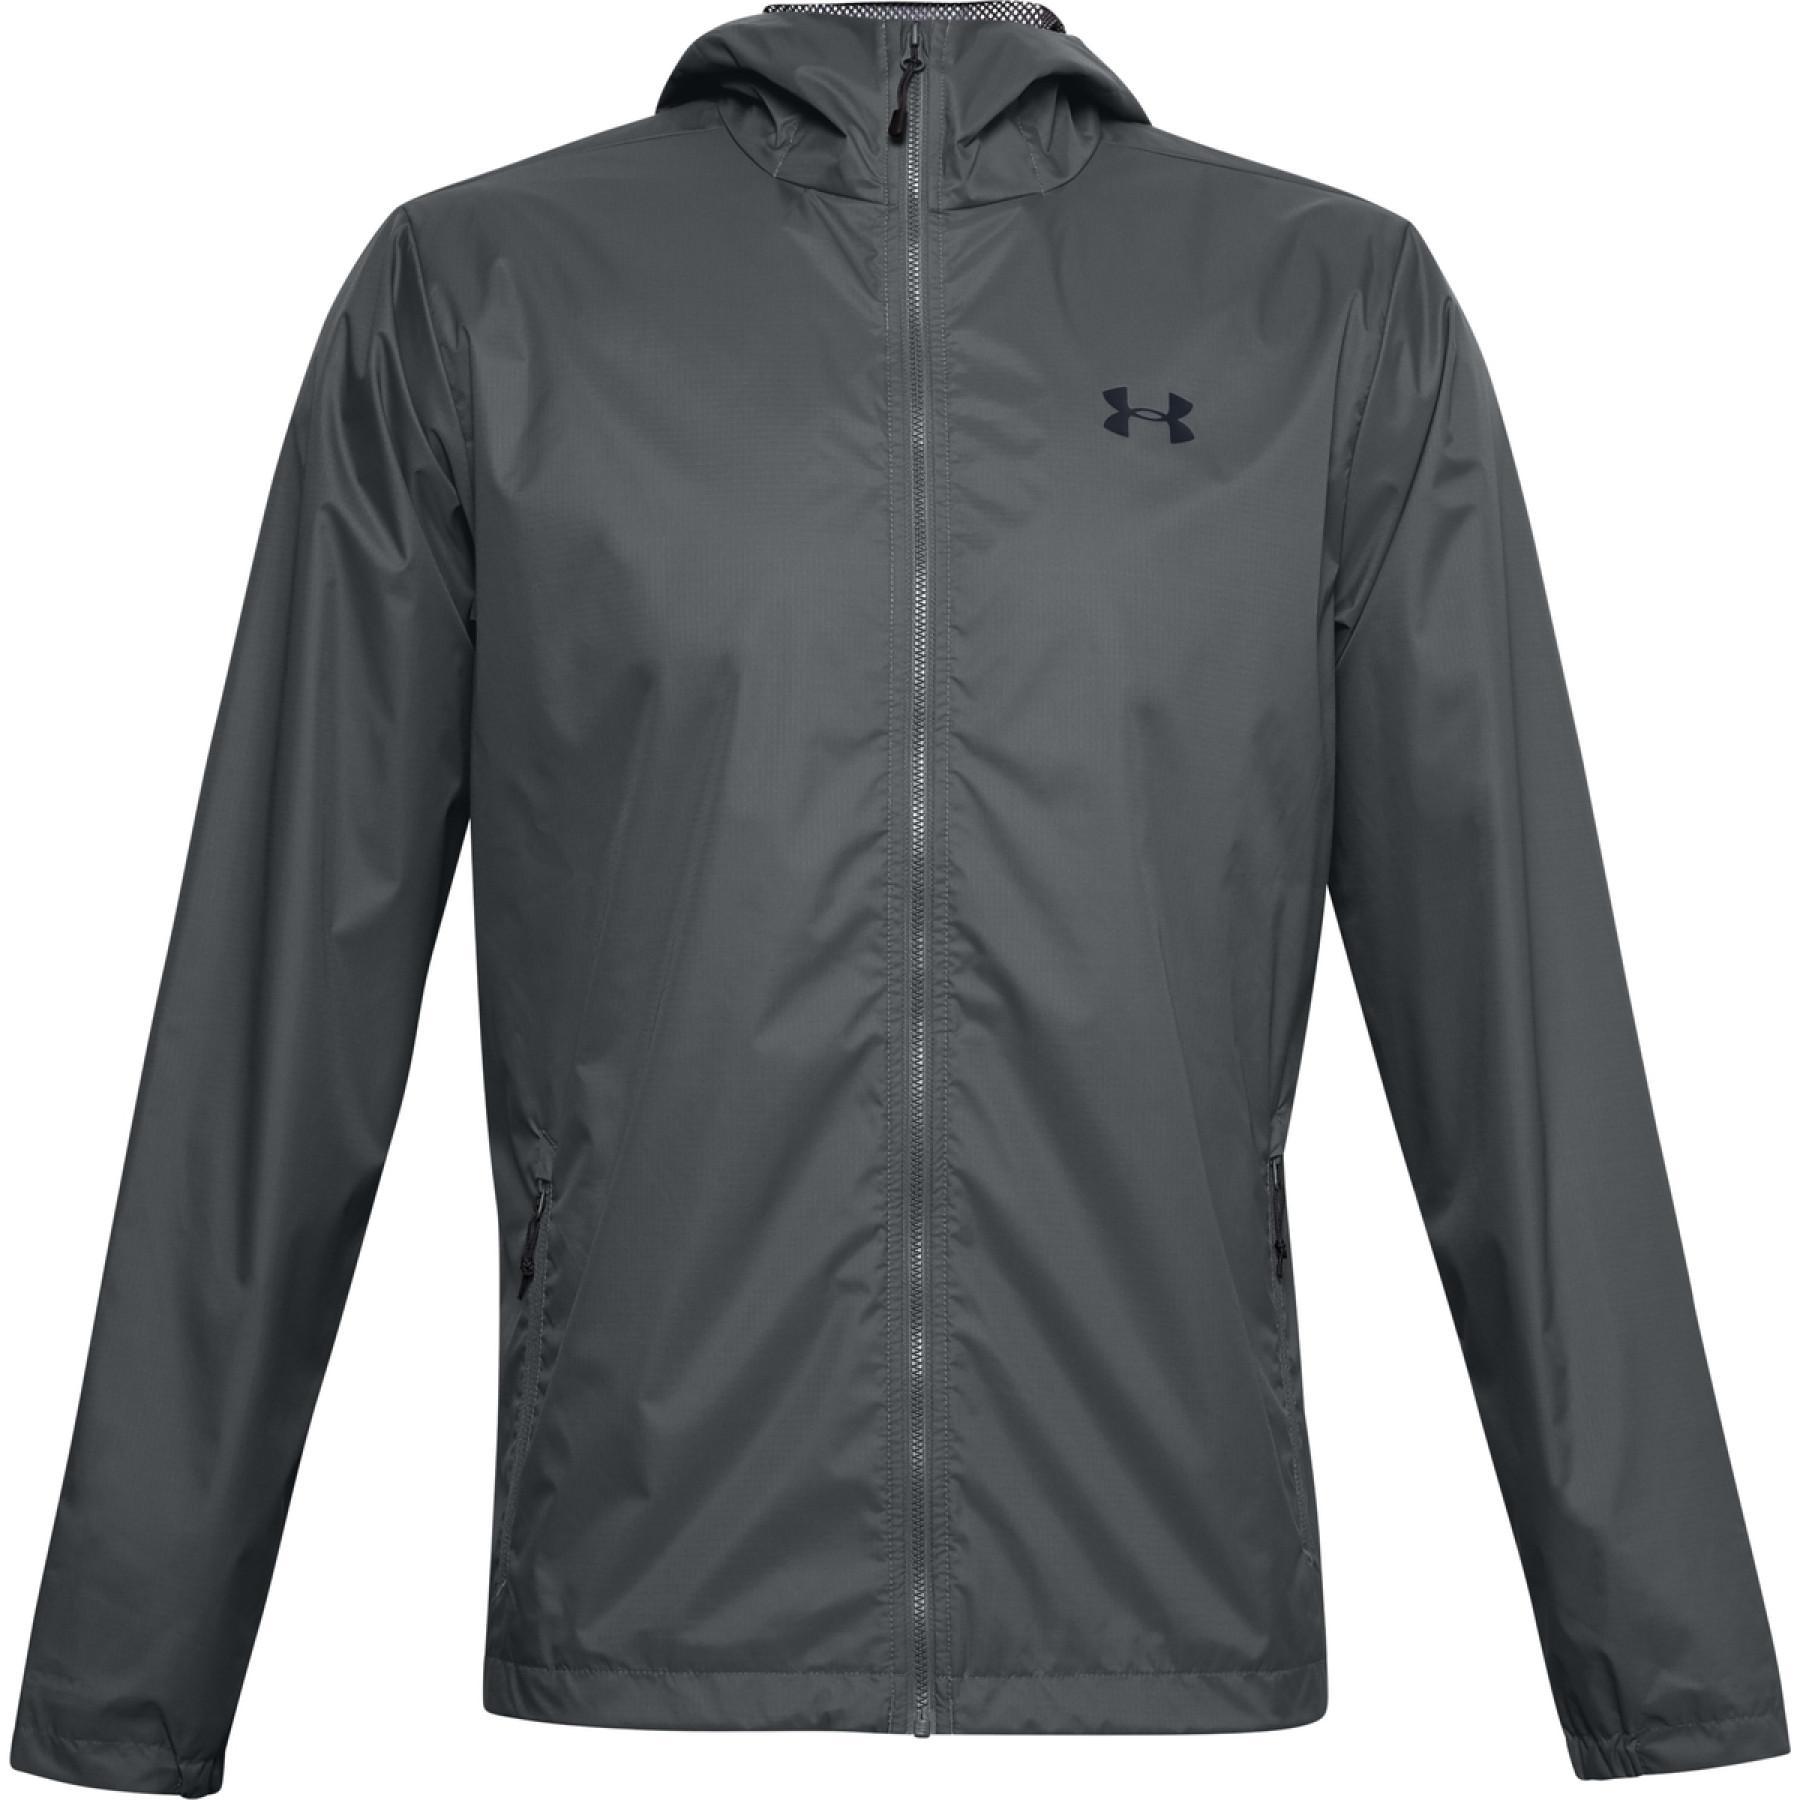 Jacka Under Armour imperméable Forefront